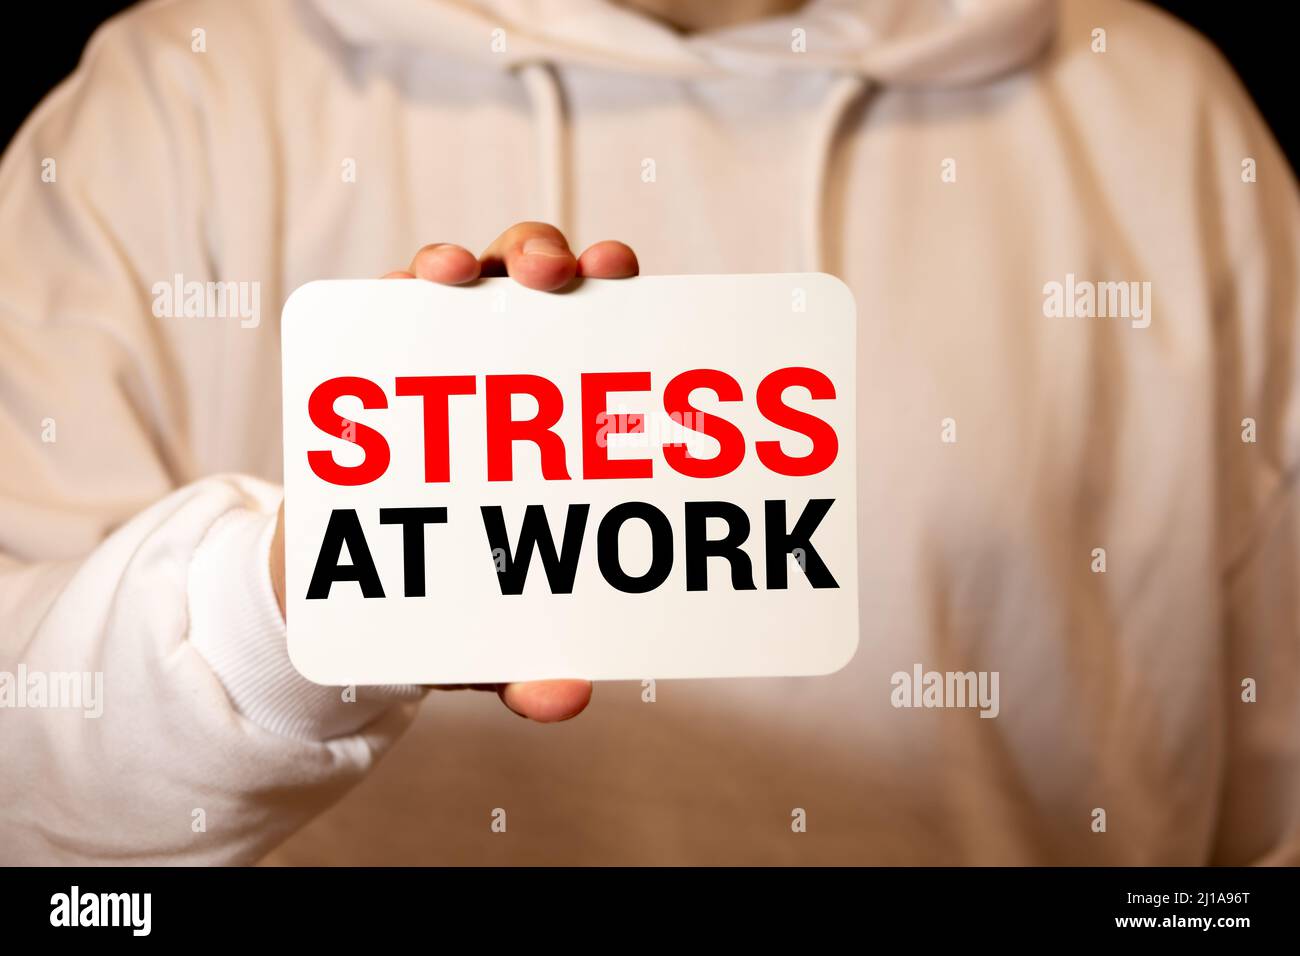 Concept conceptual mental stress at workplace or job abstract word cloud in hand isolated on background metaphor to health, work, depression, problem, Stock Photo